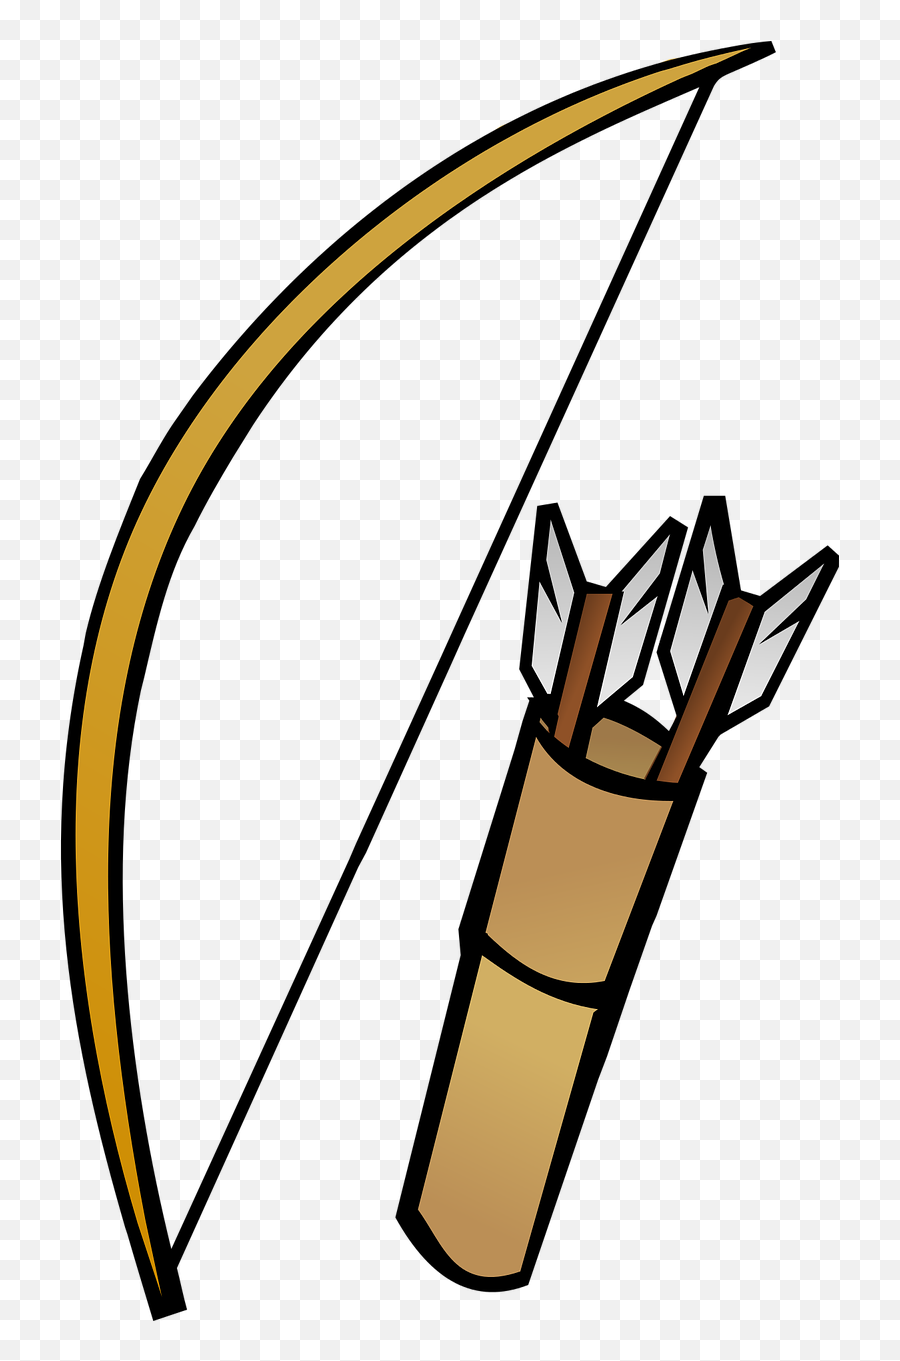 Bow And Quiver - Bow And Arrow Clipart Png Download Full Bow And Arrow Clipart Emoji,Bow And Arrow Clipart